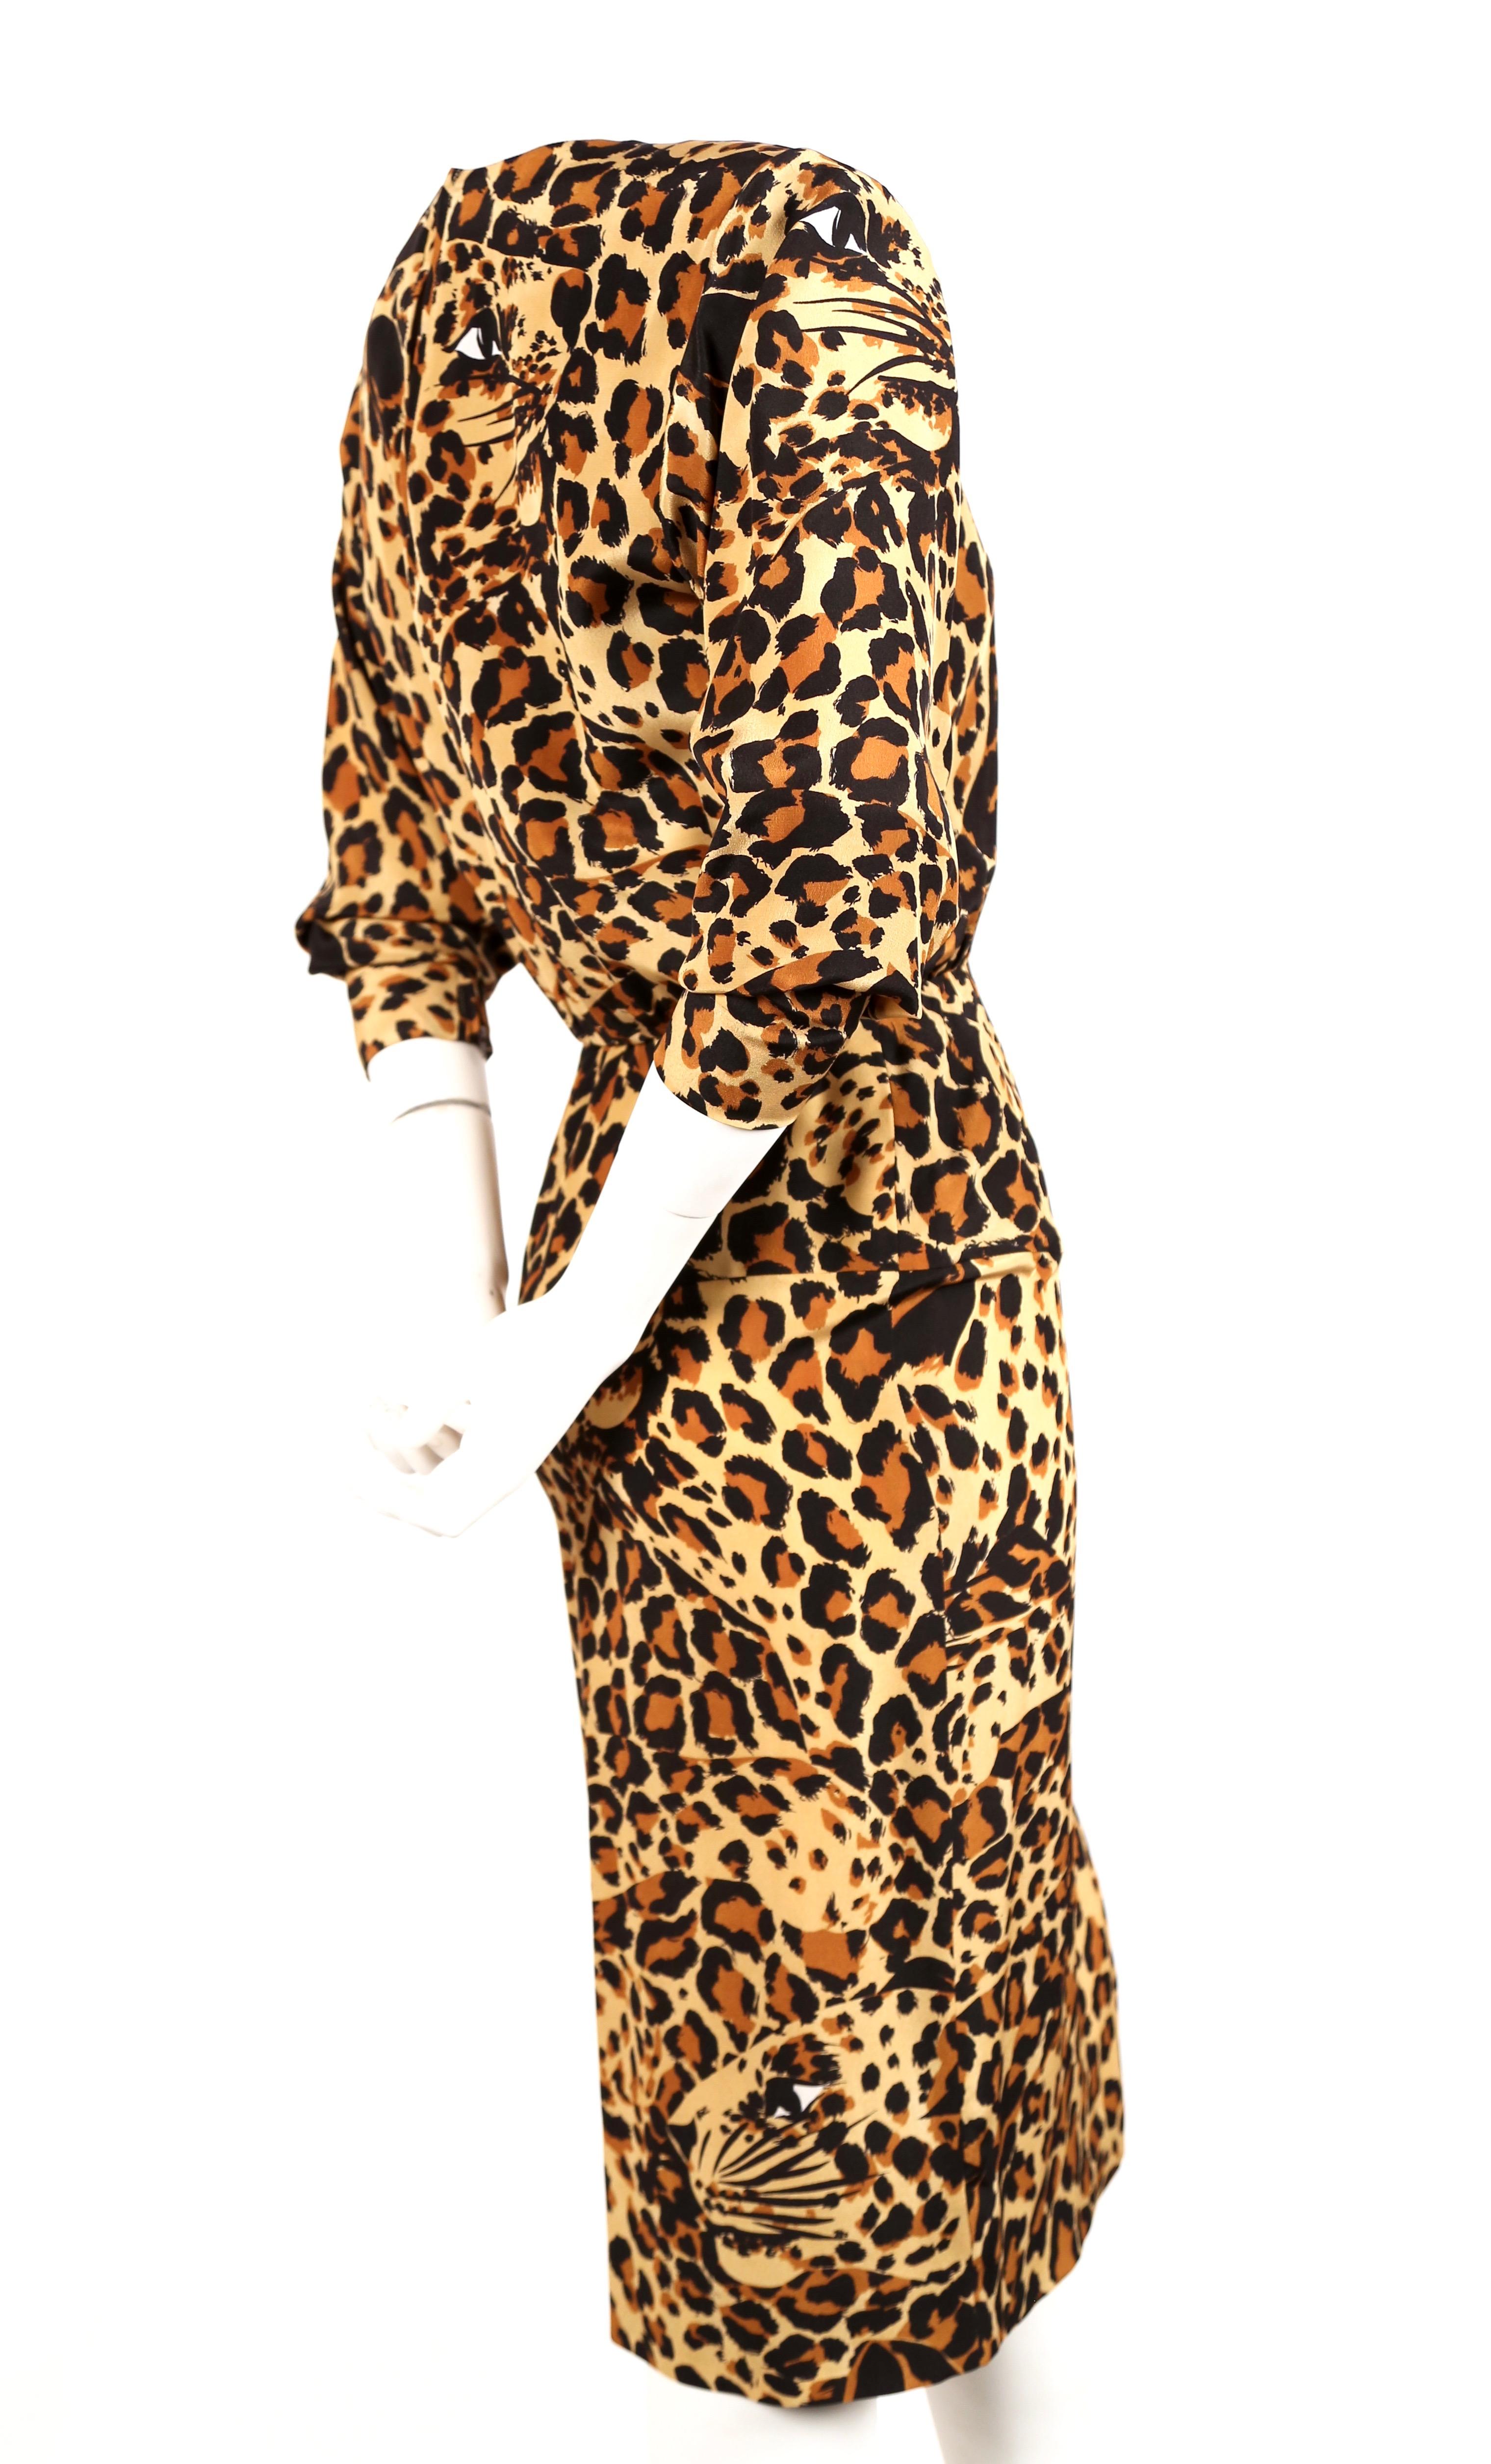 Well documented leopard printed silk dress with asymmetrical side tie from Yves Saint Laurent dating to Fall 1986 as seen on the runway. Labeled a French size 38. Approximate measurements: shoulders 16